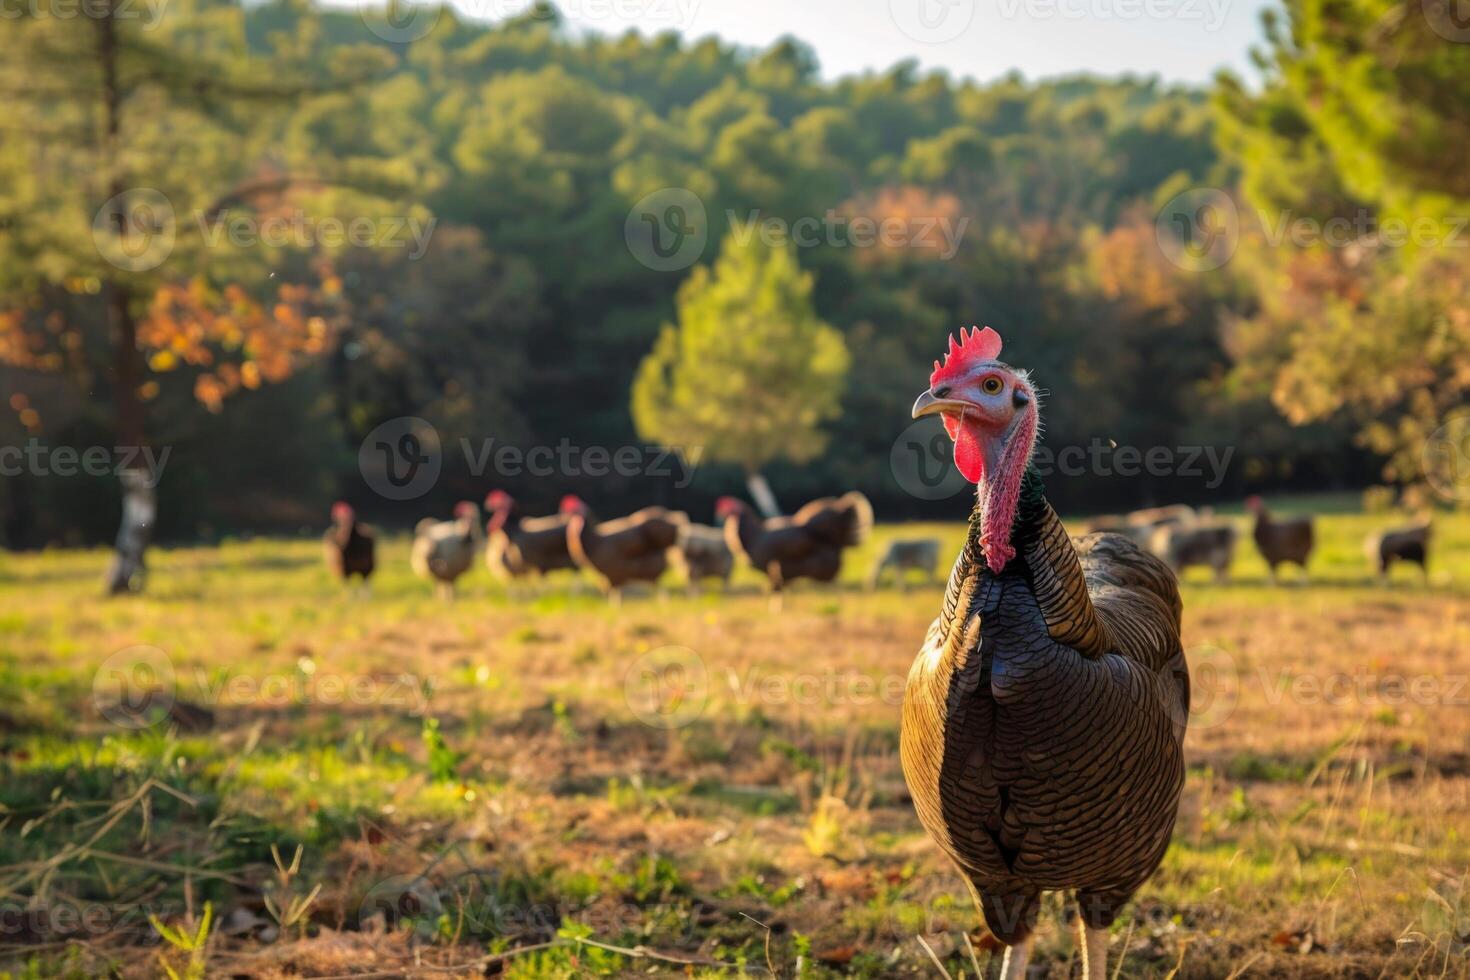 AI generated Turkey in a farm setting with other animals, showcasing agriculture and avian diversity in a pastoral rural landscape photo